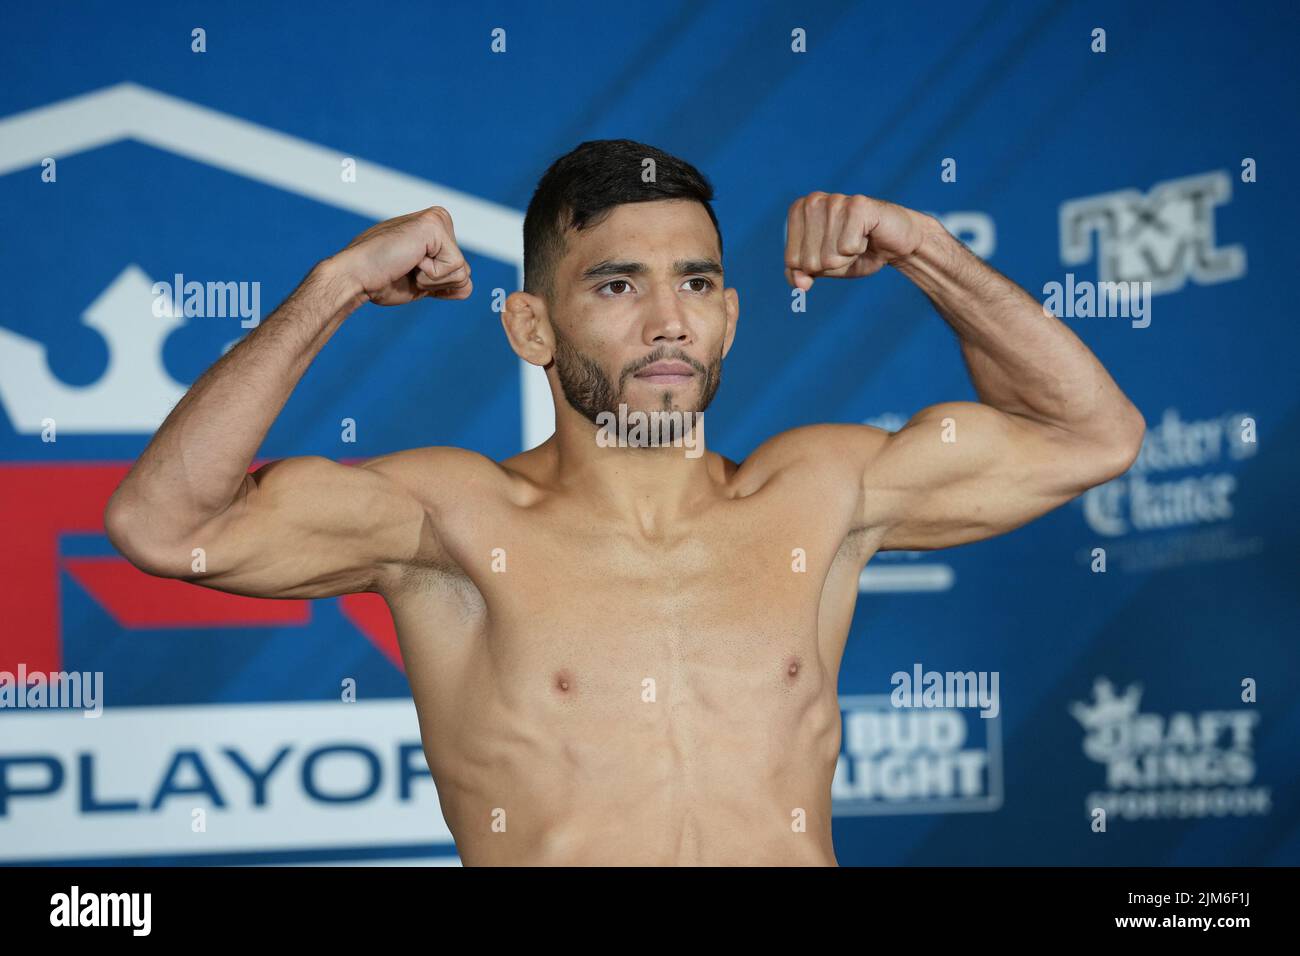 NEW YORK CITY, NY - August 4: Brahyan Zurcher steps on the scale for the official weigh-ins at The New Yorker Hotel for 2022 PFL Playoffs Semi-Finals : Official Weigh-ins on August 4, 2022 in New York City, NY, United States. (Photo by Louis Grasse/PxImages) Stock Photo